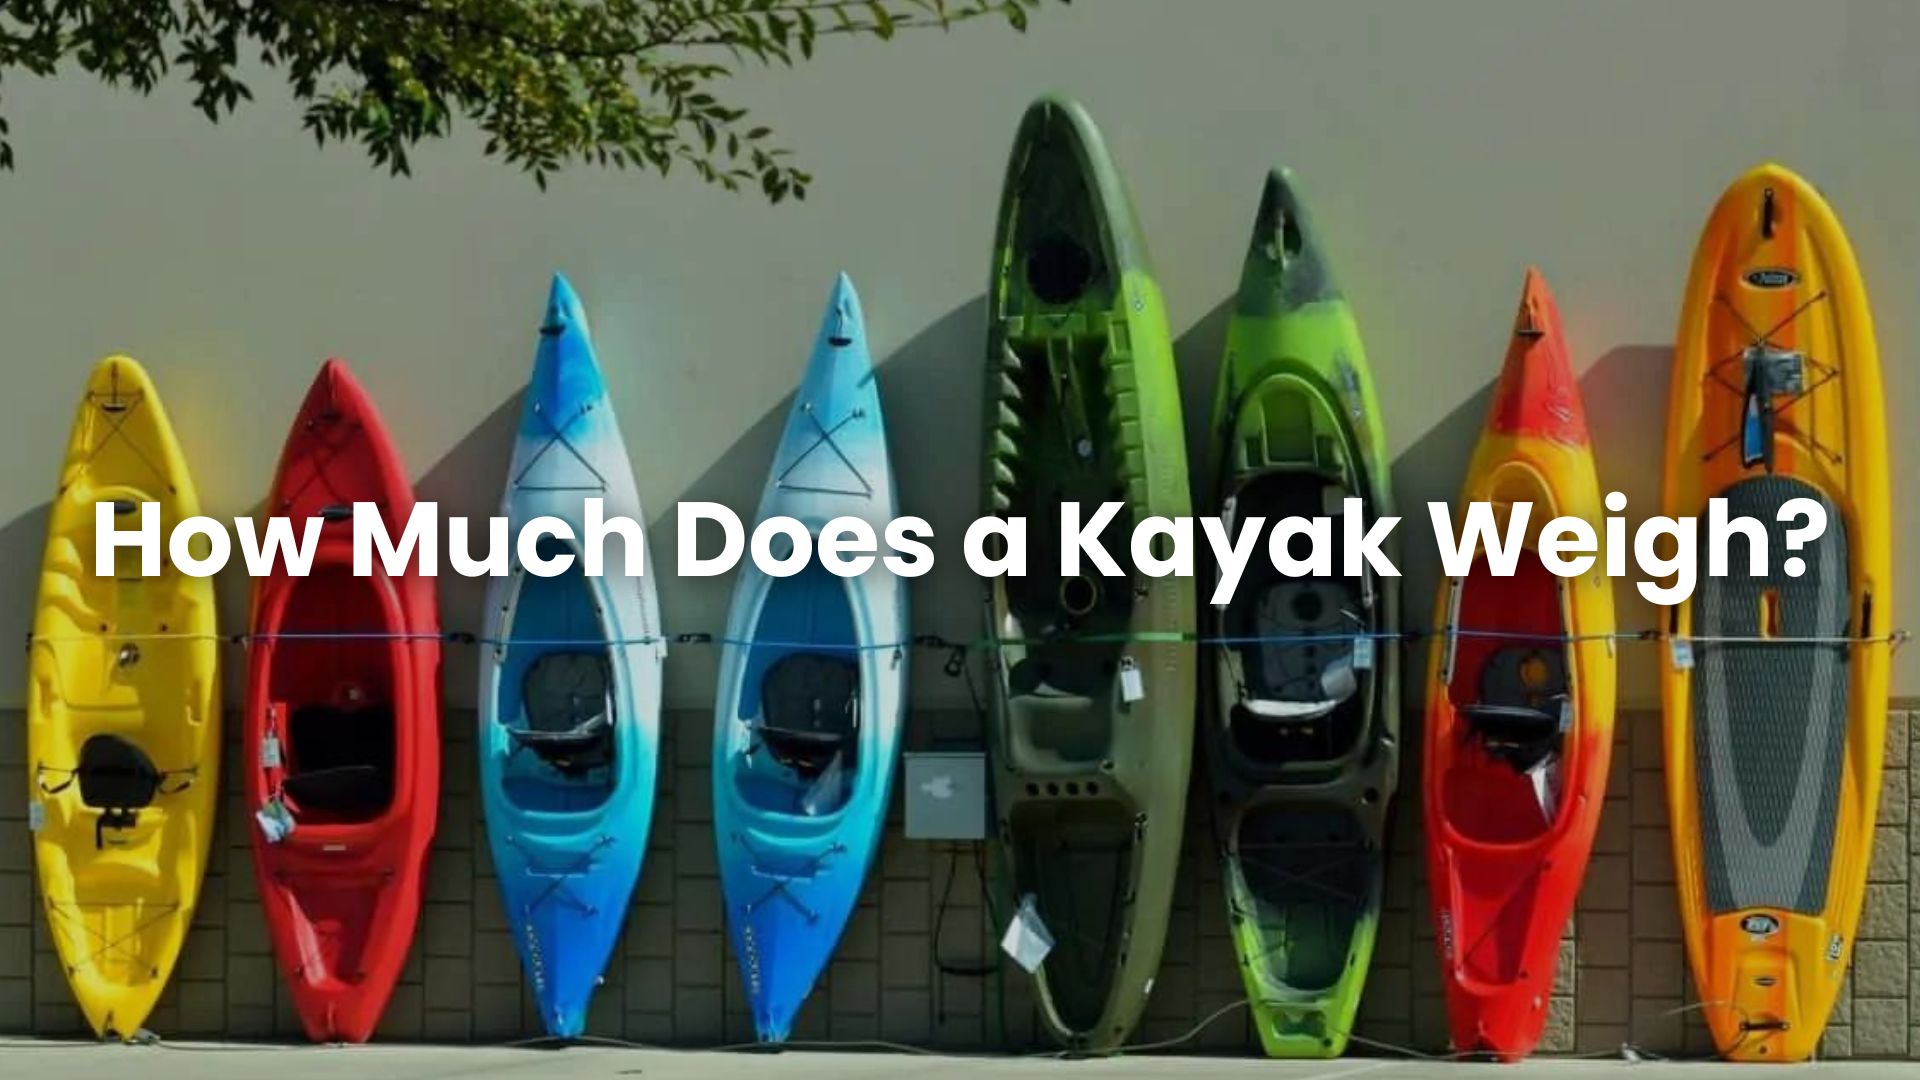 How Much Does a Kayak Weigh